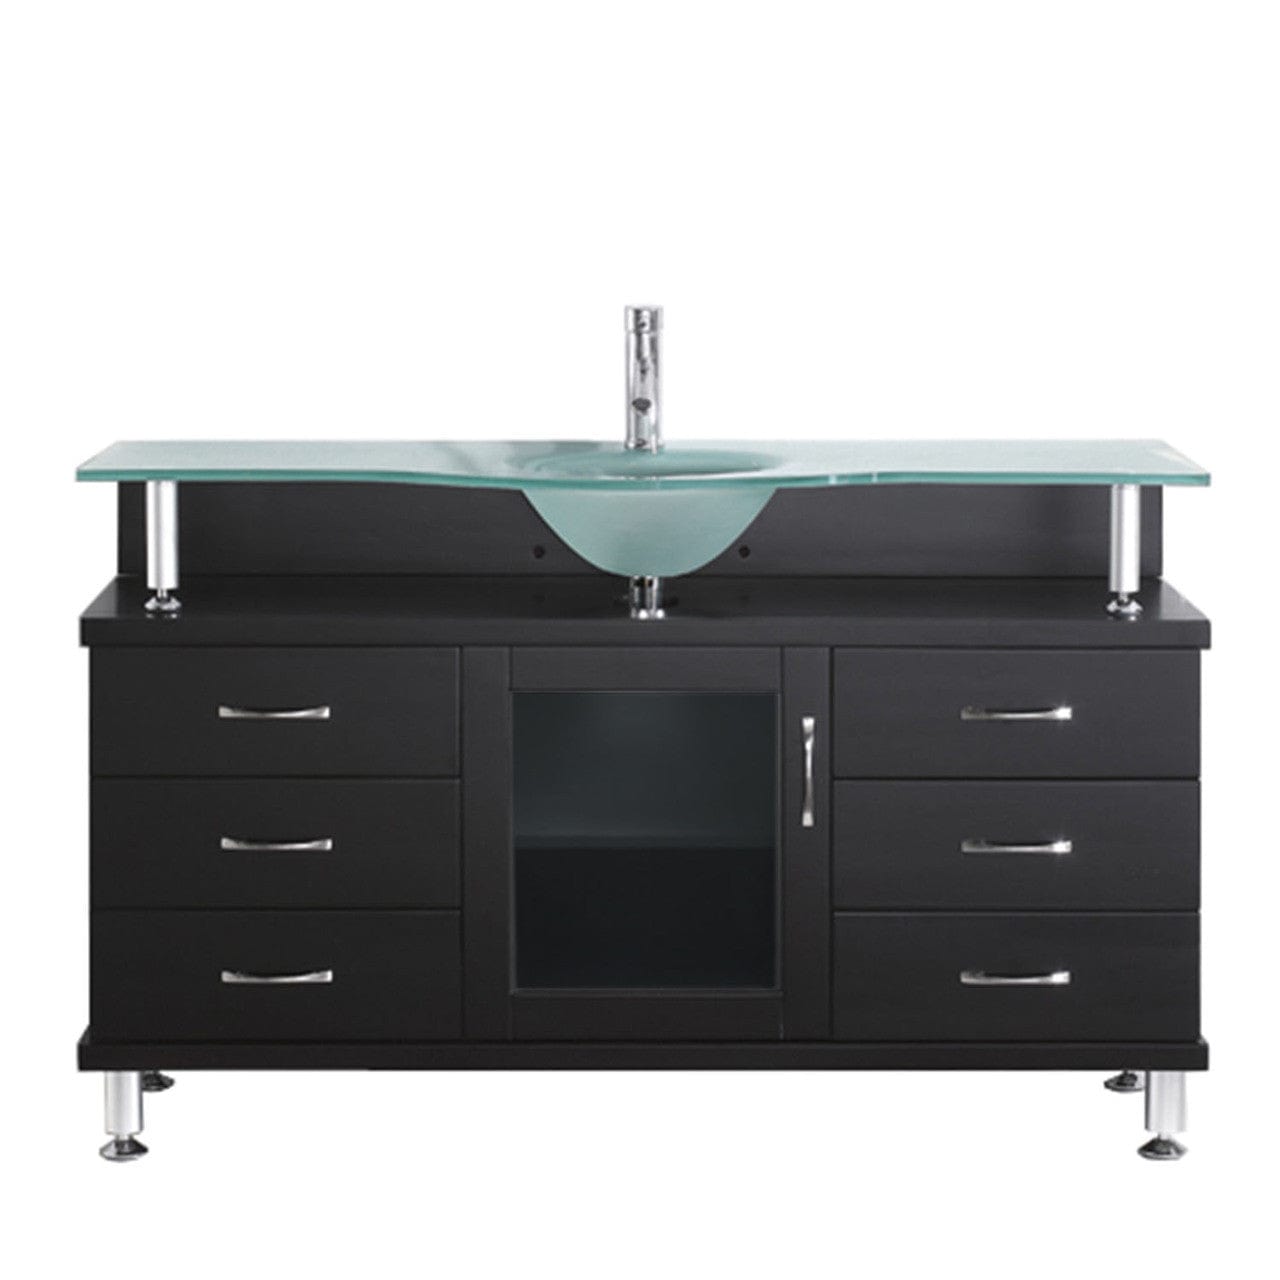 Virtu USA Vincente 55" Single Bathroom Vanity in Espresso w/ Frosted Tempered Glass Counter-Top